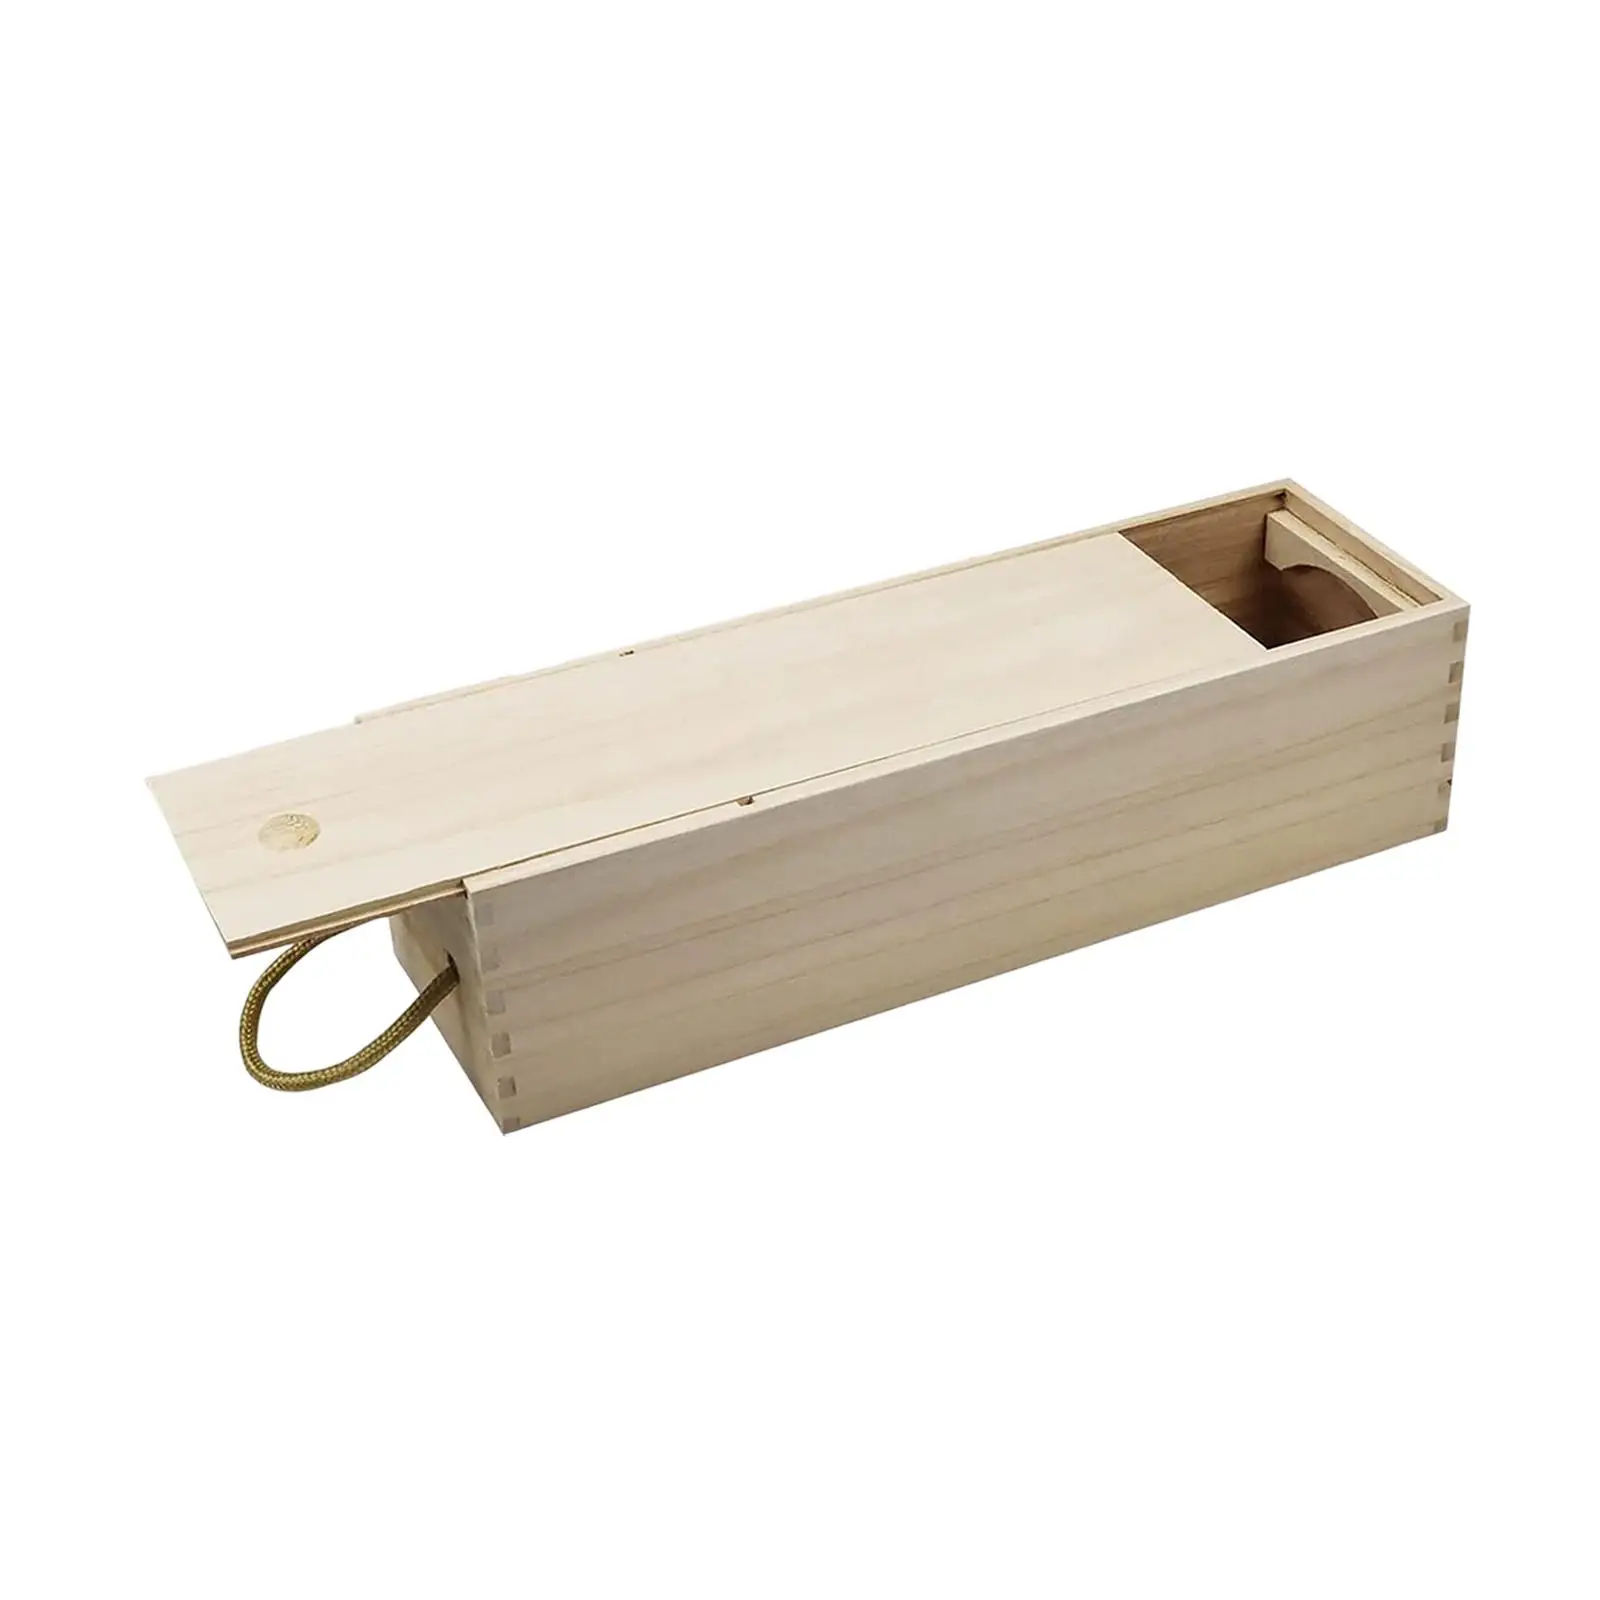 Single Wine Bottle Wood Storage Gift Box 34x11x11cm Wine Carrier for Party Wedding